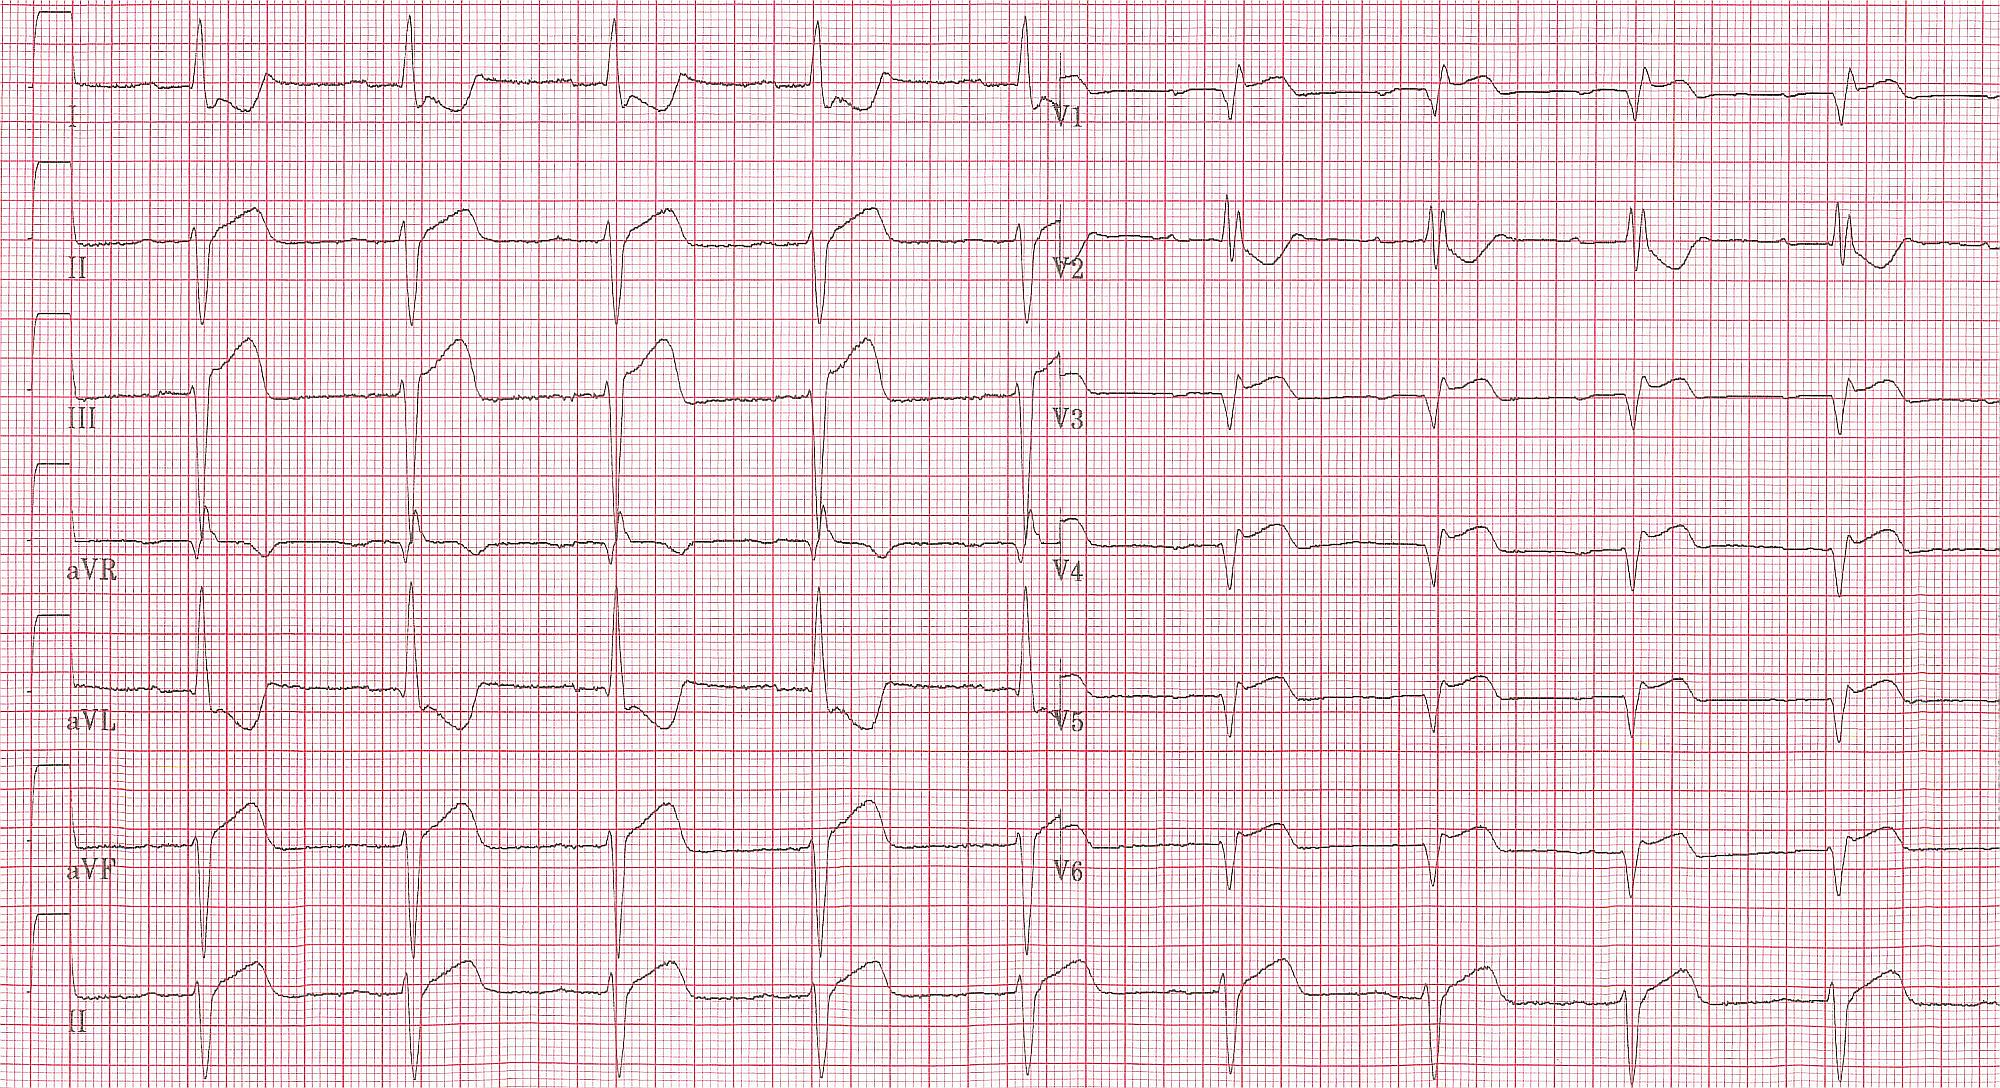 The same patient. Lead V4R. ST elevation shown.